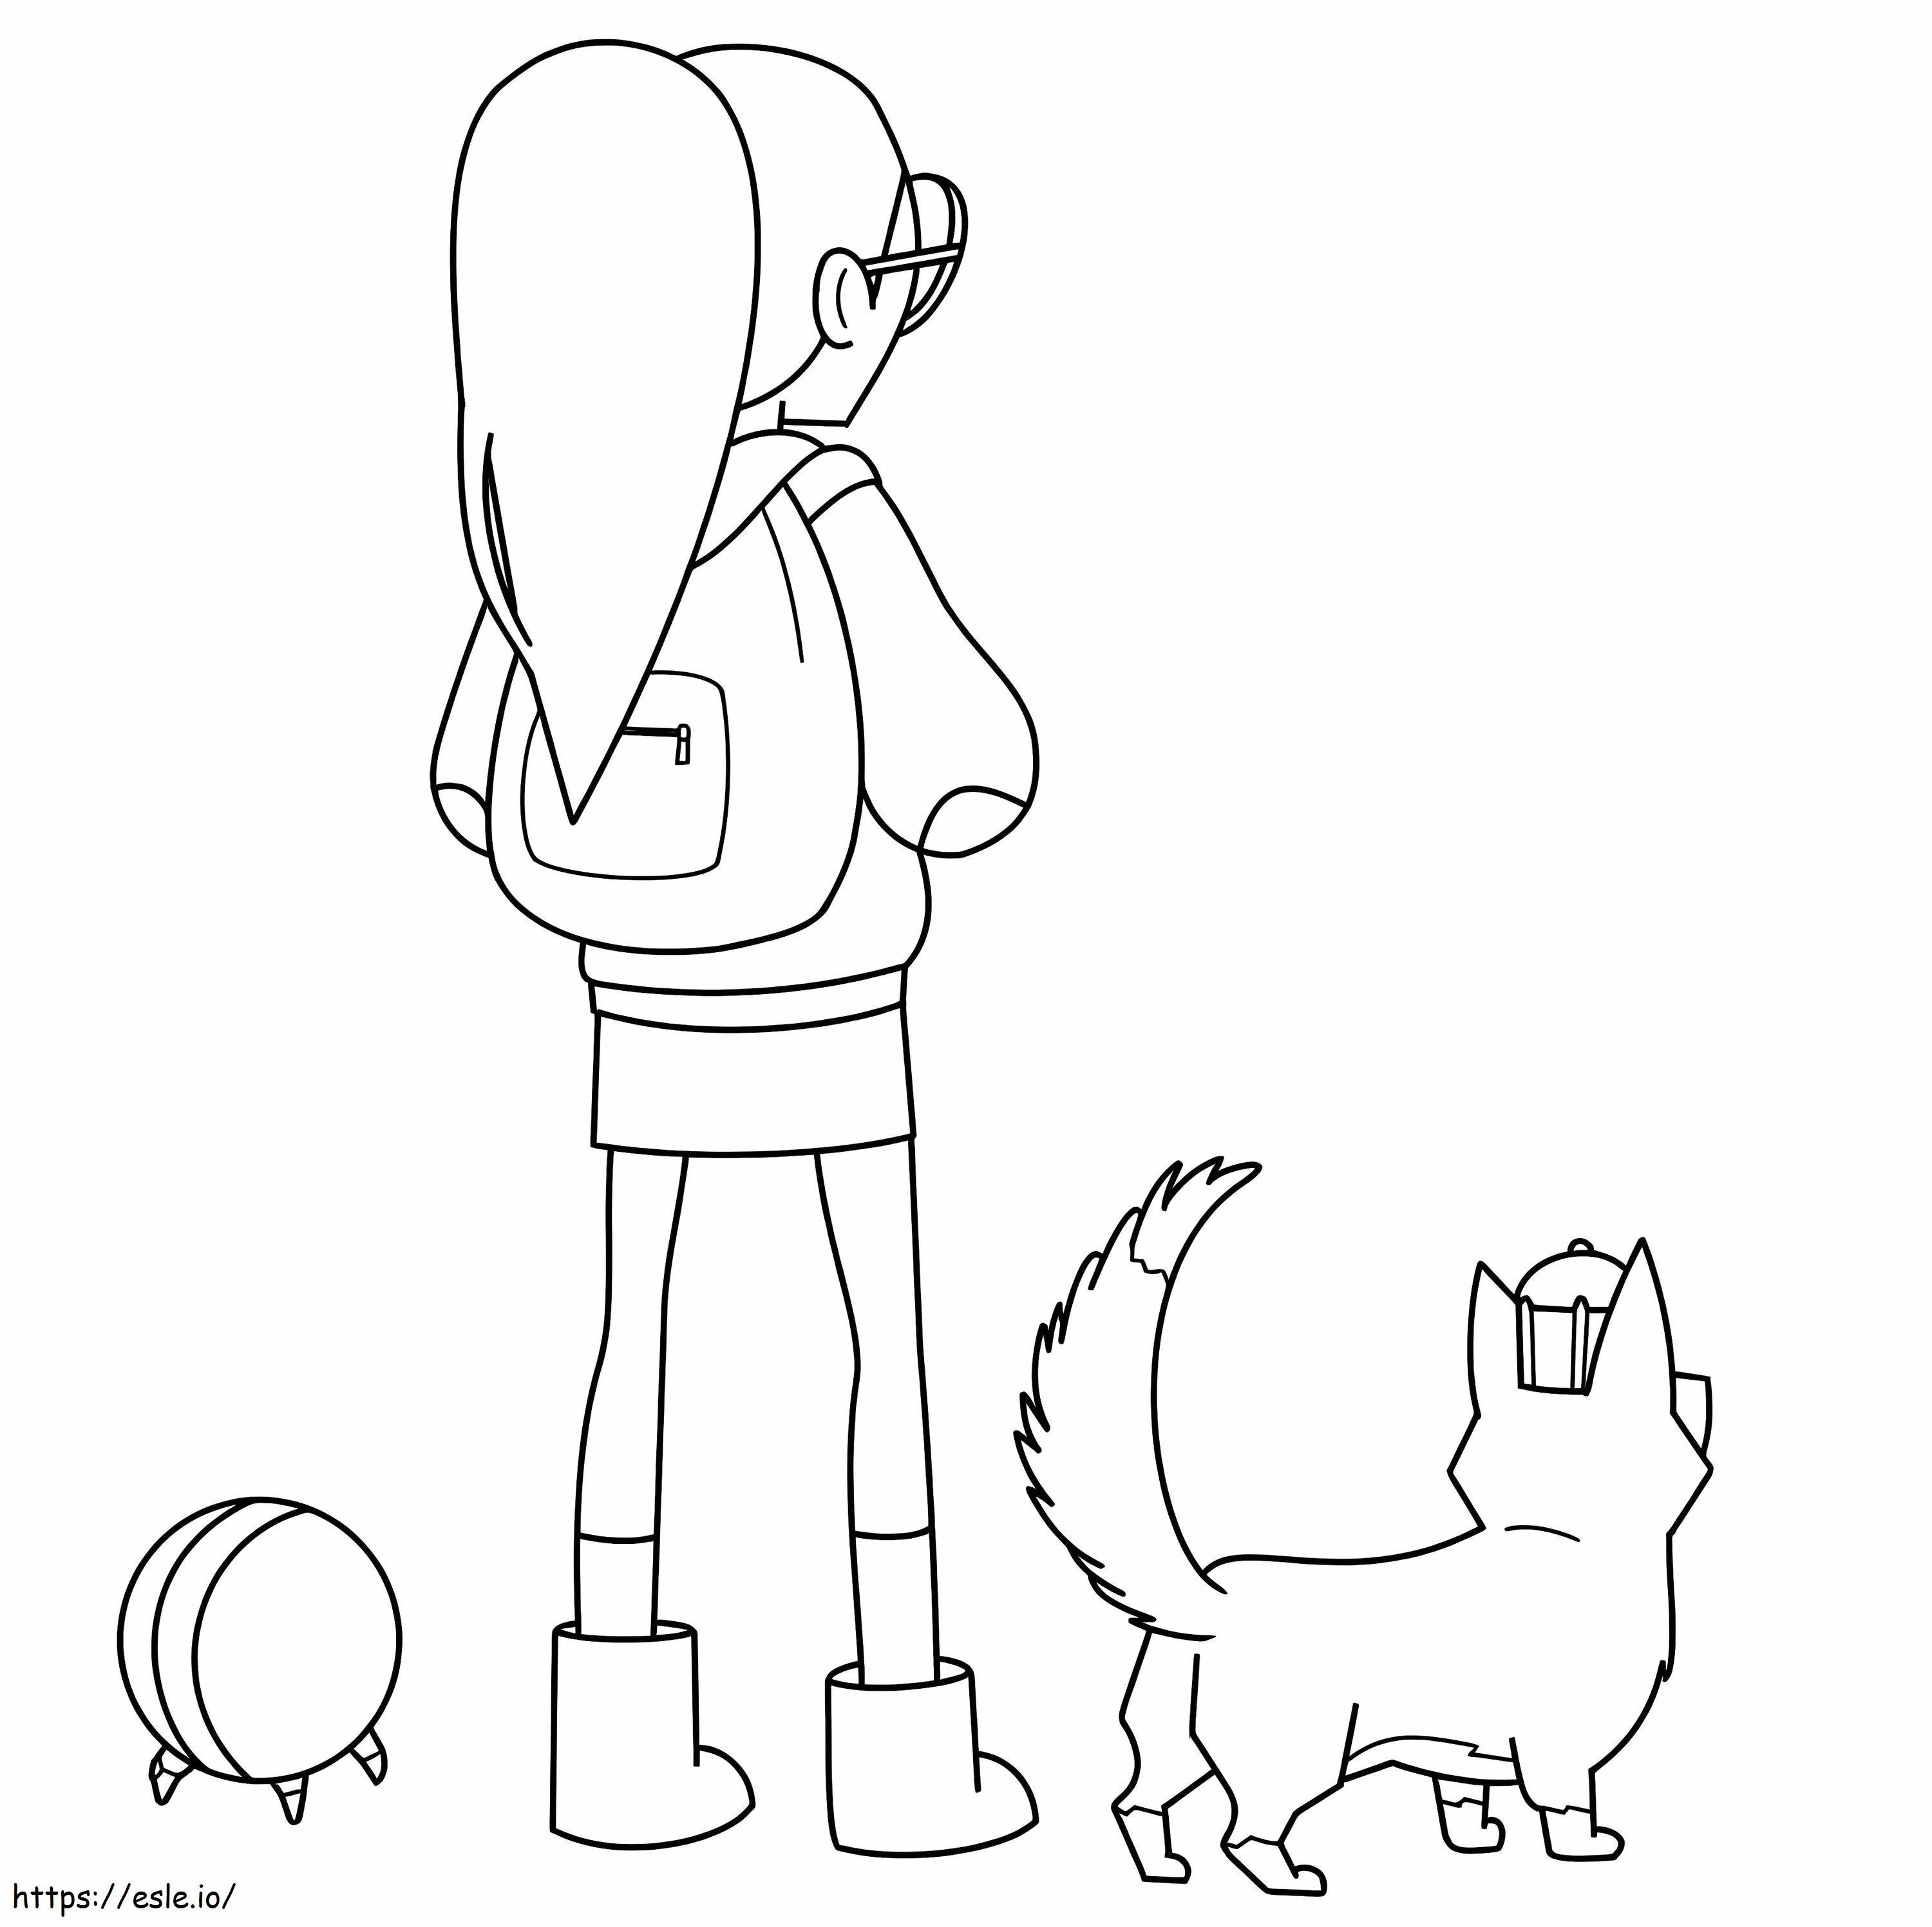 Infinity Train coloring page